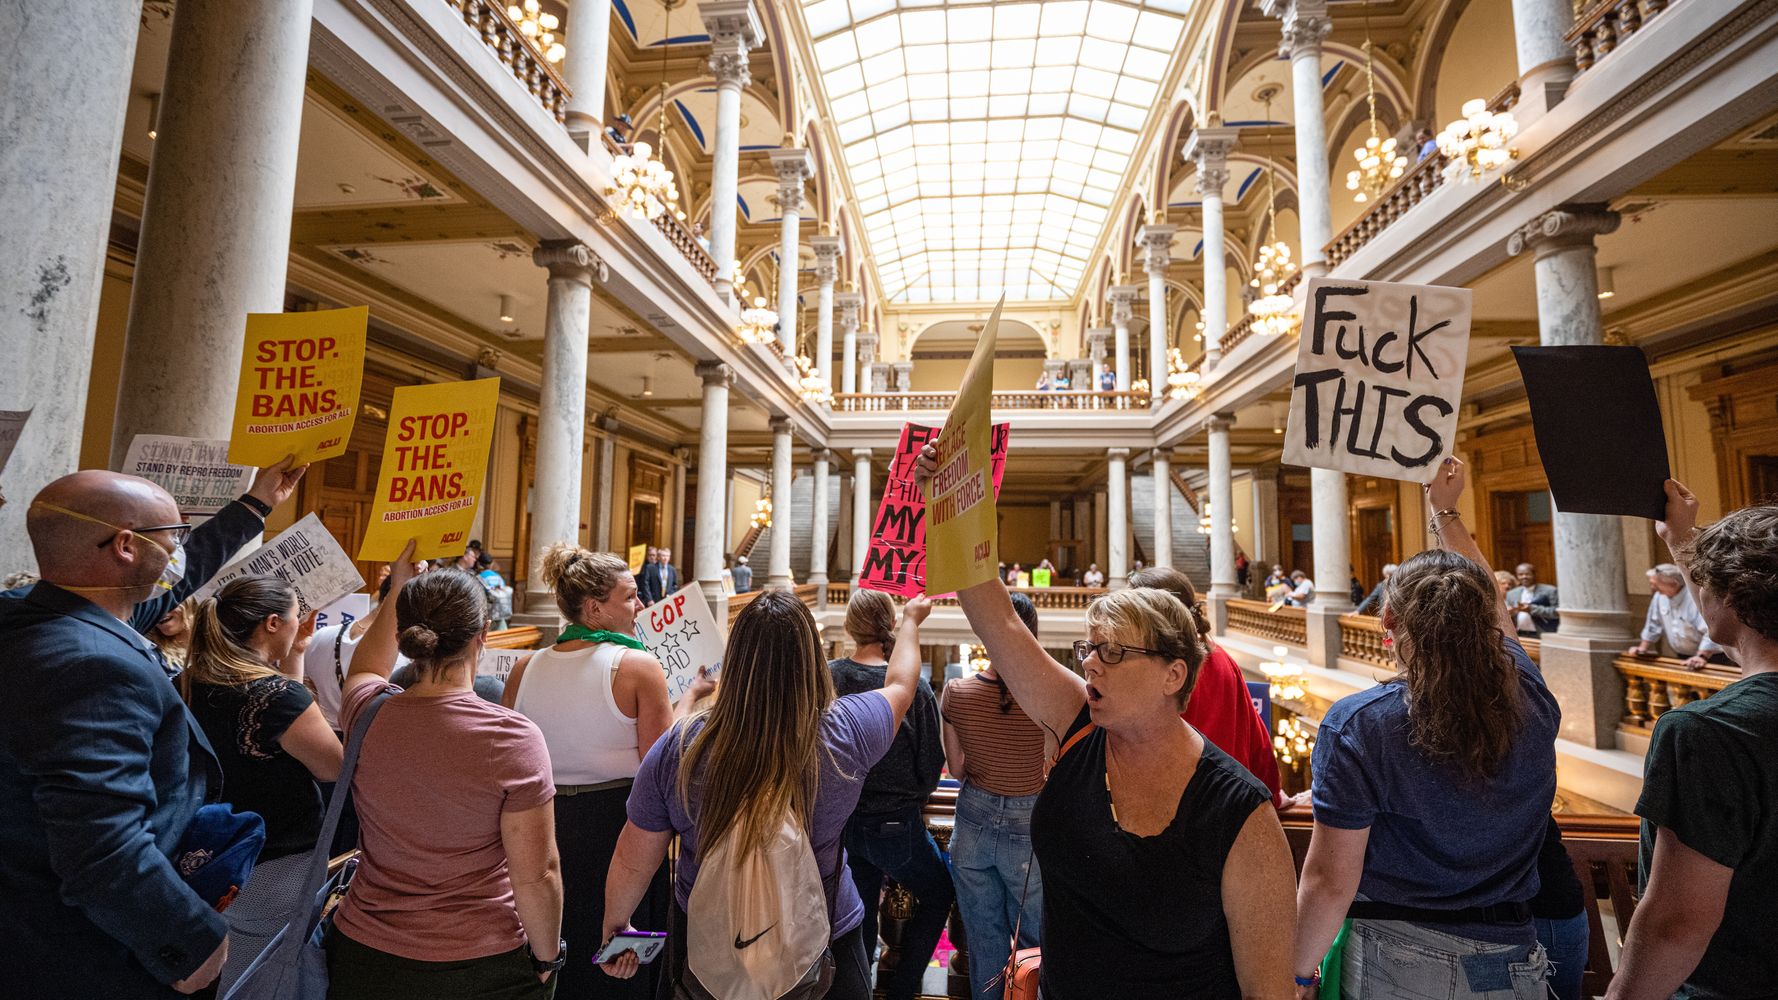 Protestors Descend On Indiana Statehouse As Abortion-Banning Process Begins